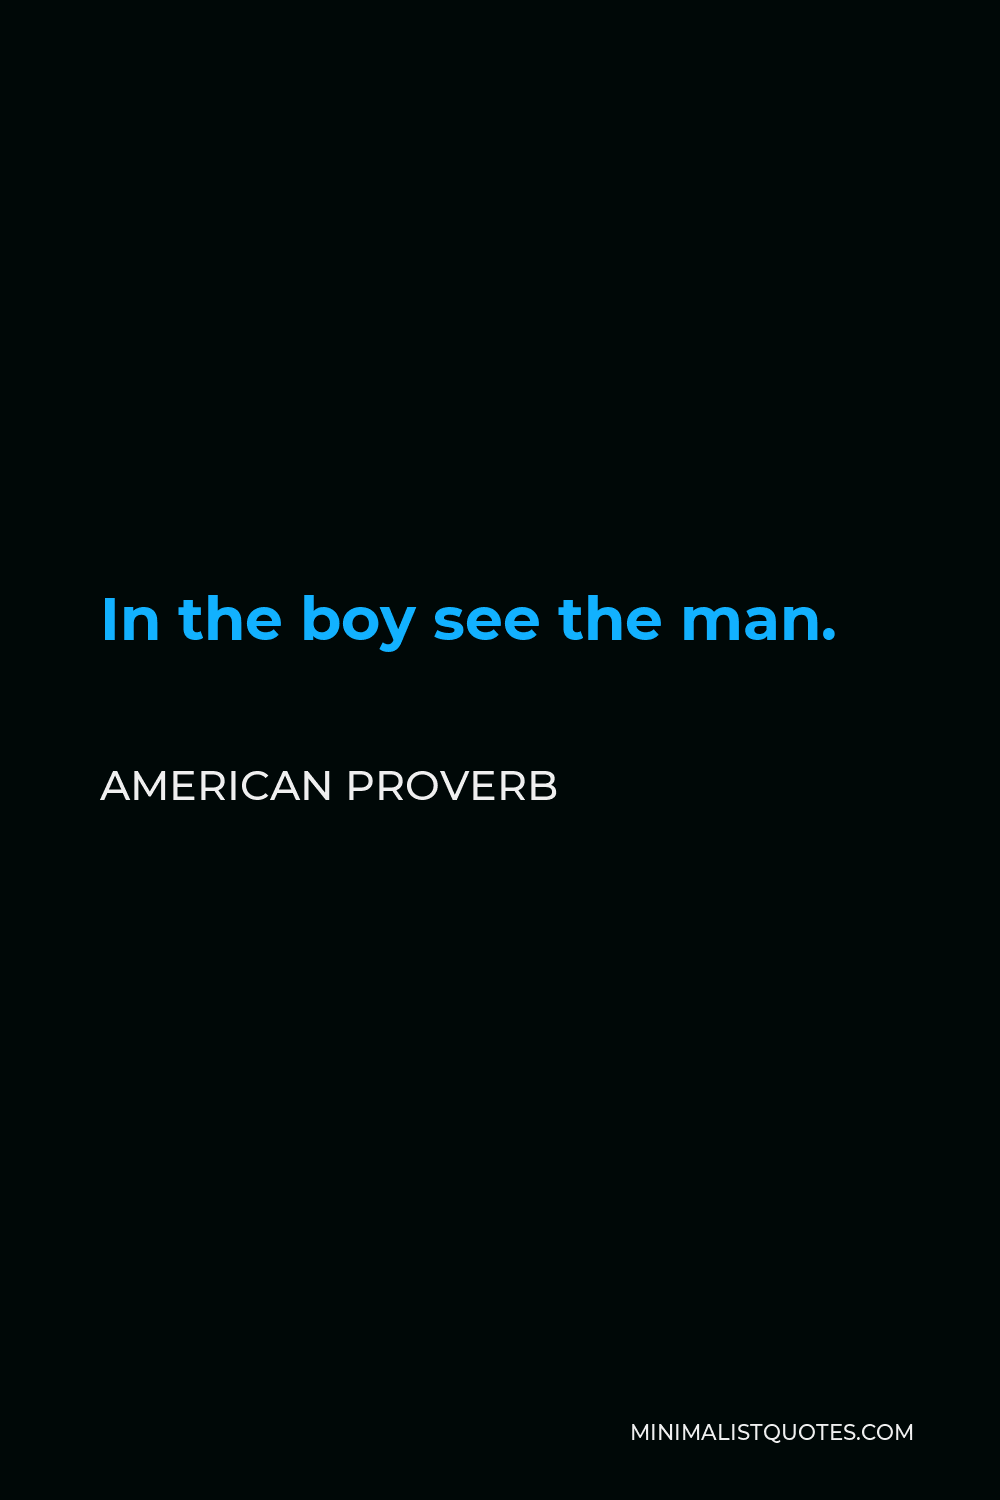 American Proverb Quote - In the boy see the man.